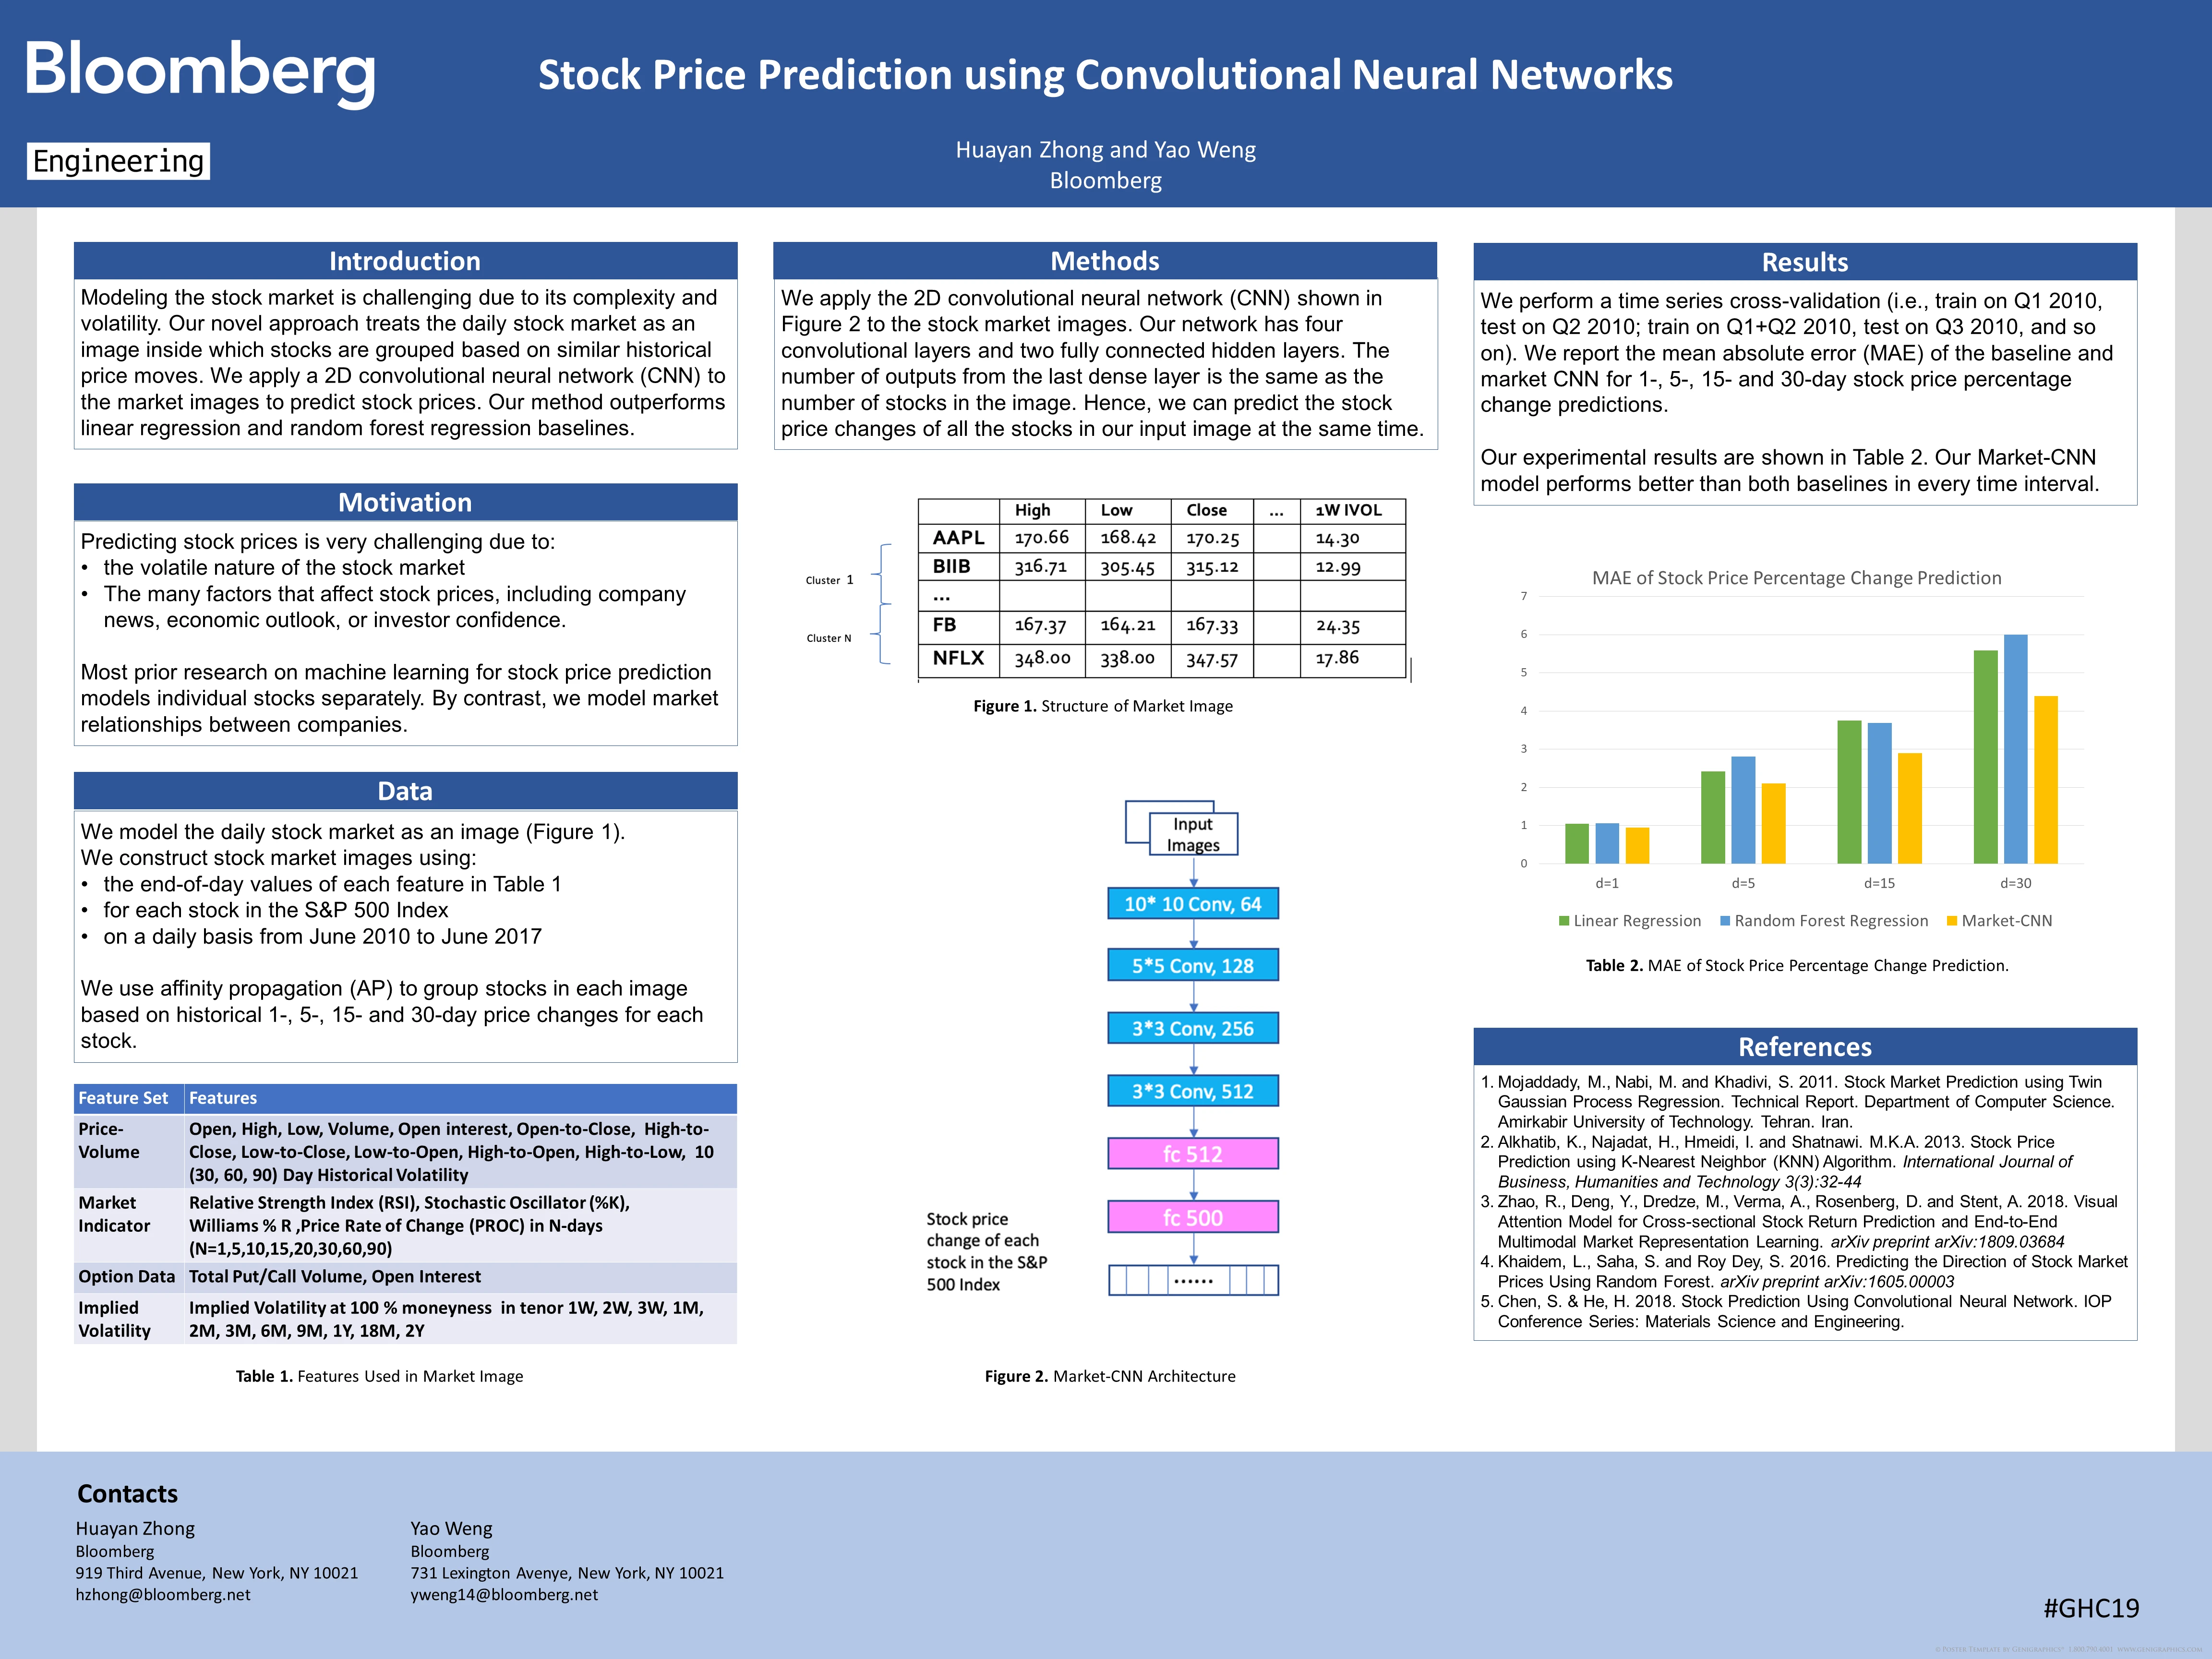 An introduction slide for Stock Price Prediction using Convolutional Neural Networks discusses the motivation behind the work, a brief introduction, data used, methods used, and the results.